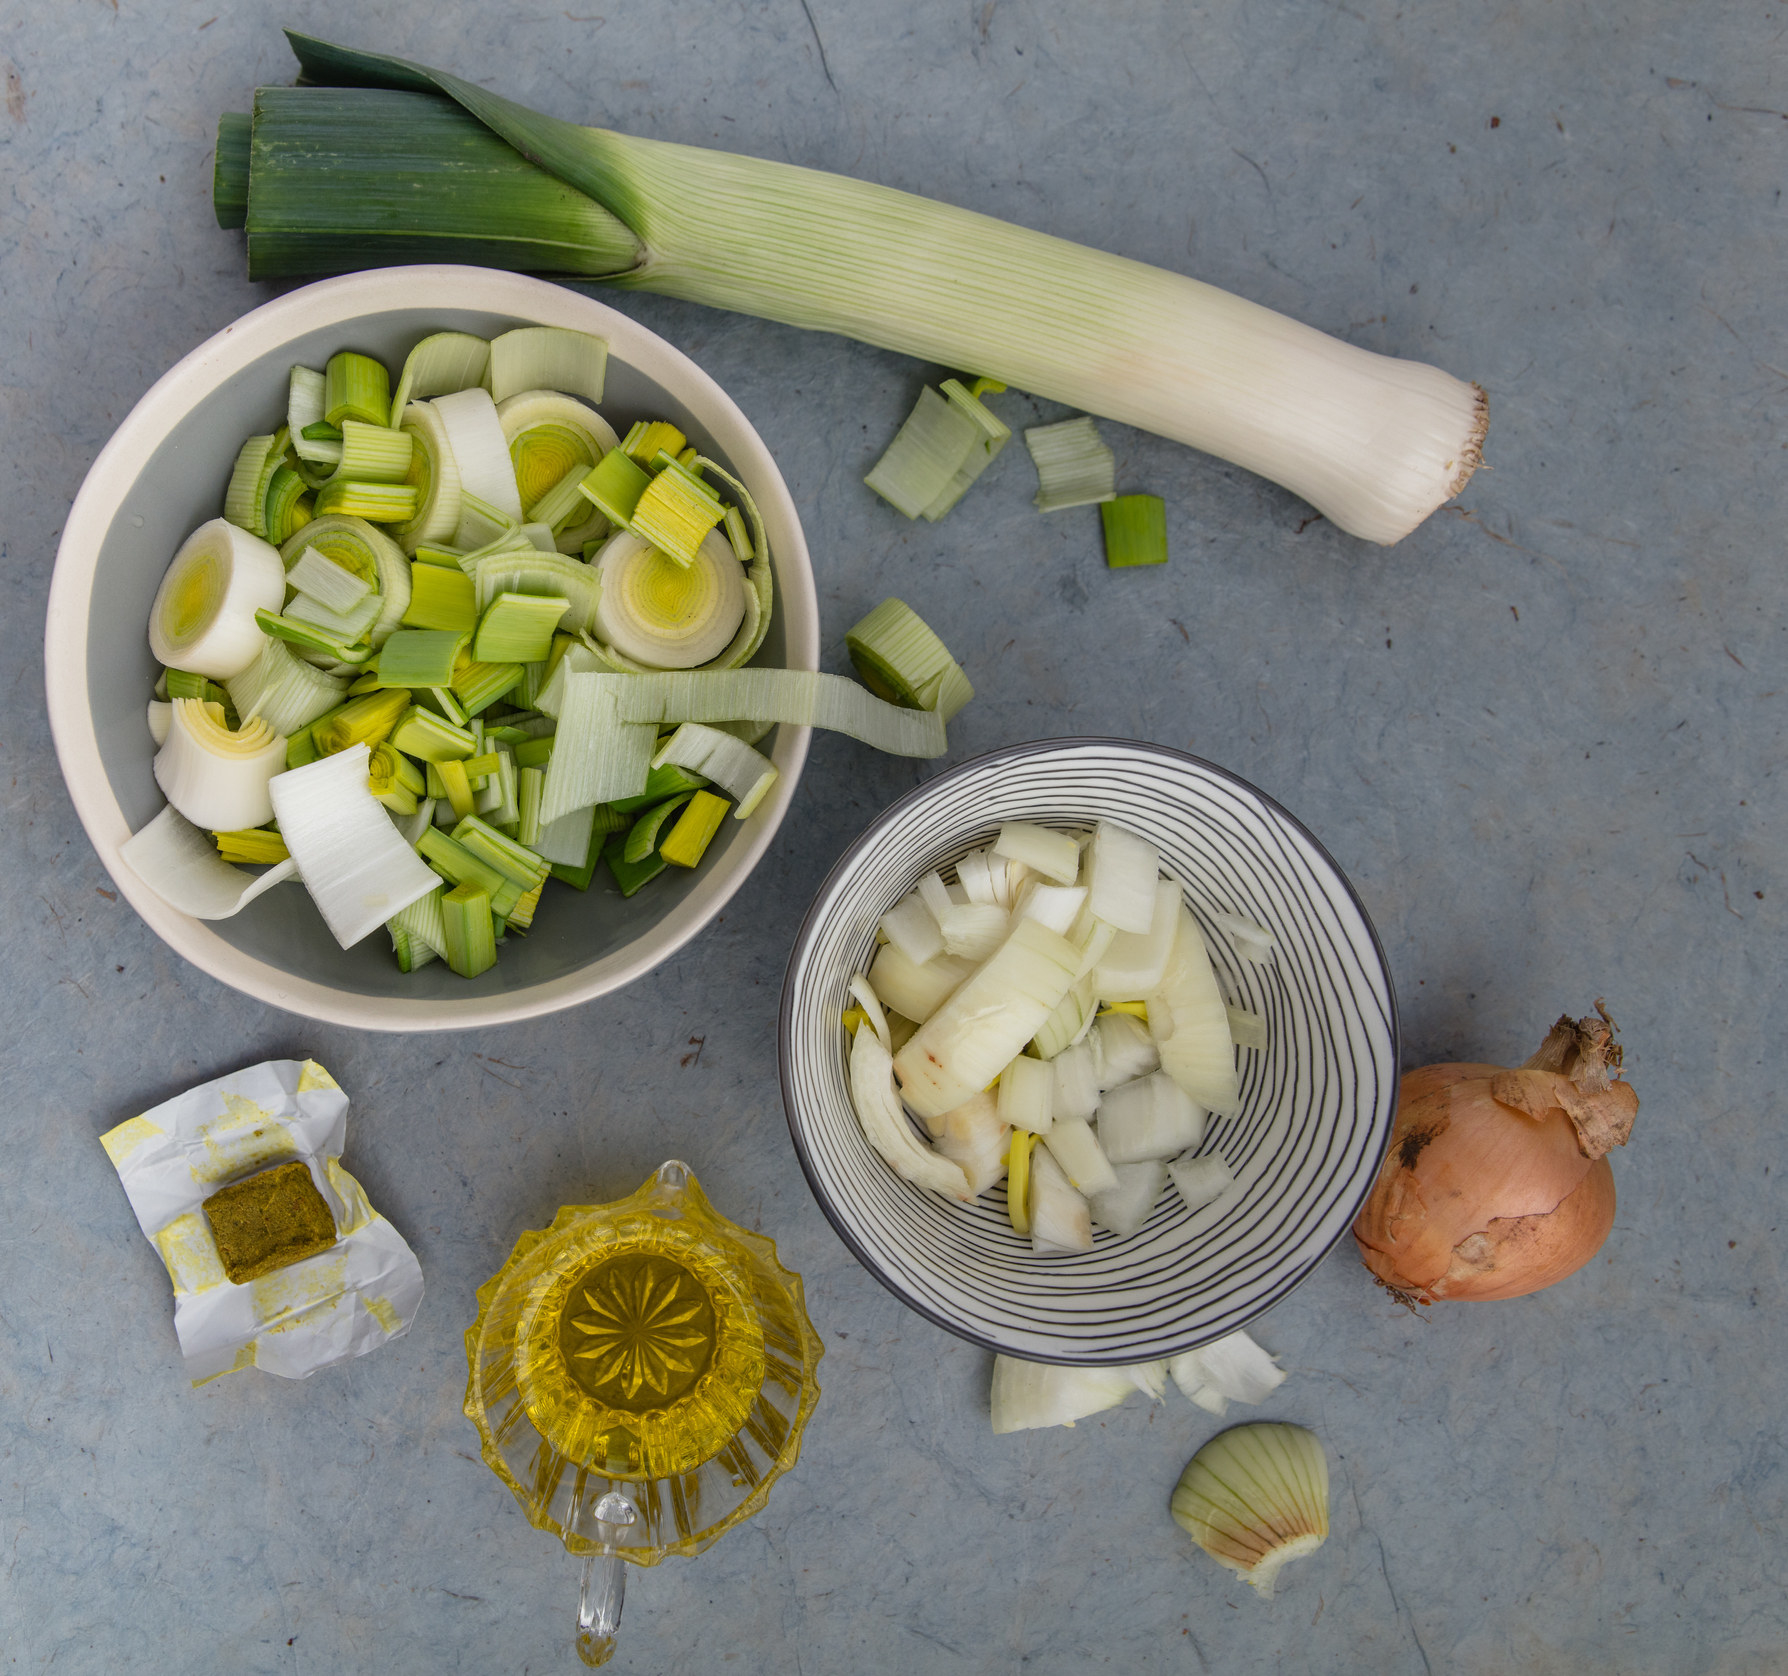 Chopped leek with leek stalk, chopped onion with onion, olive oil and a vegetable bouillon cube.